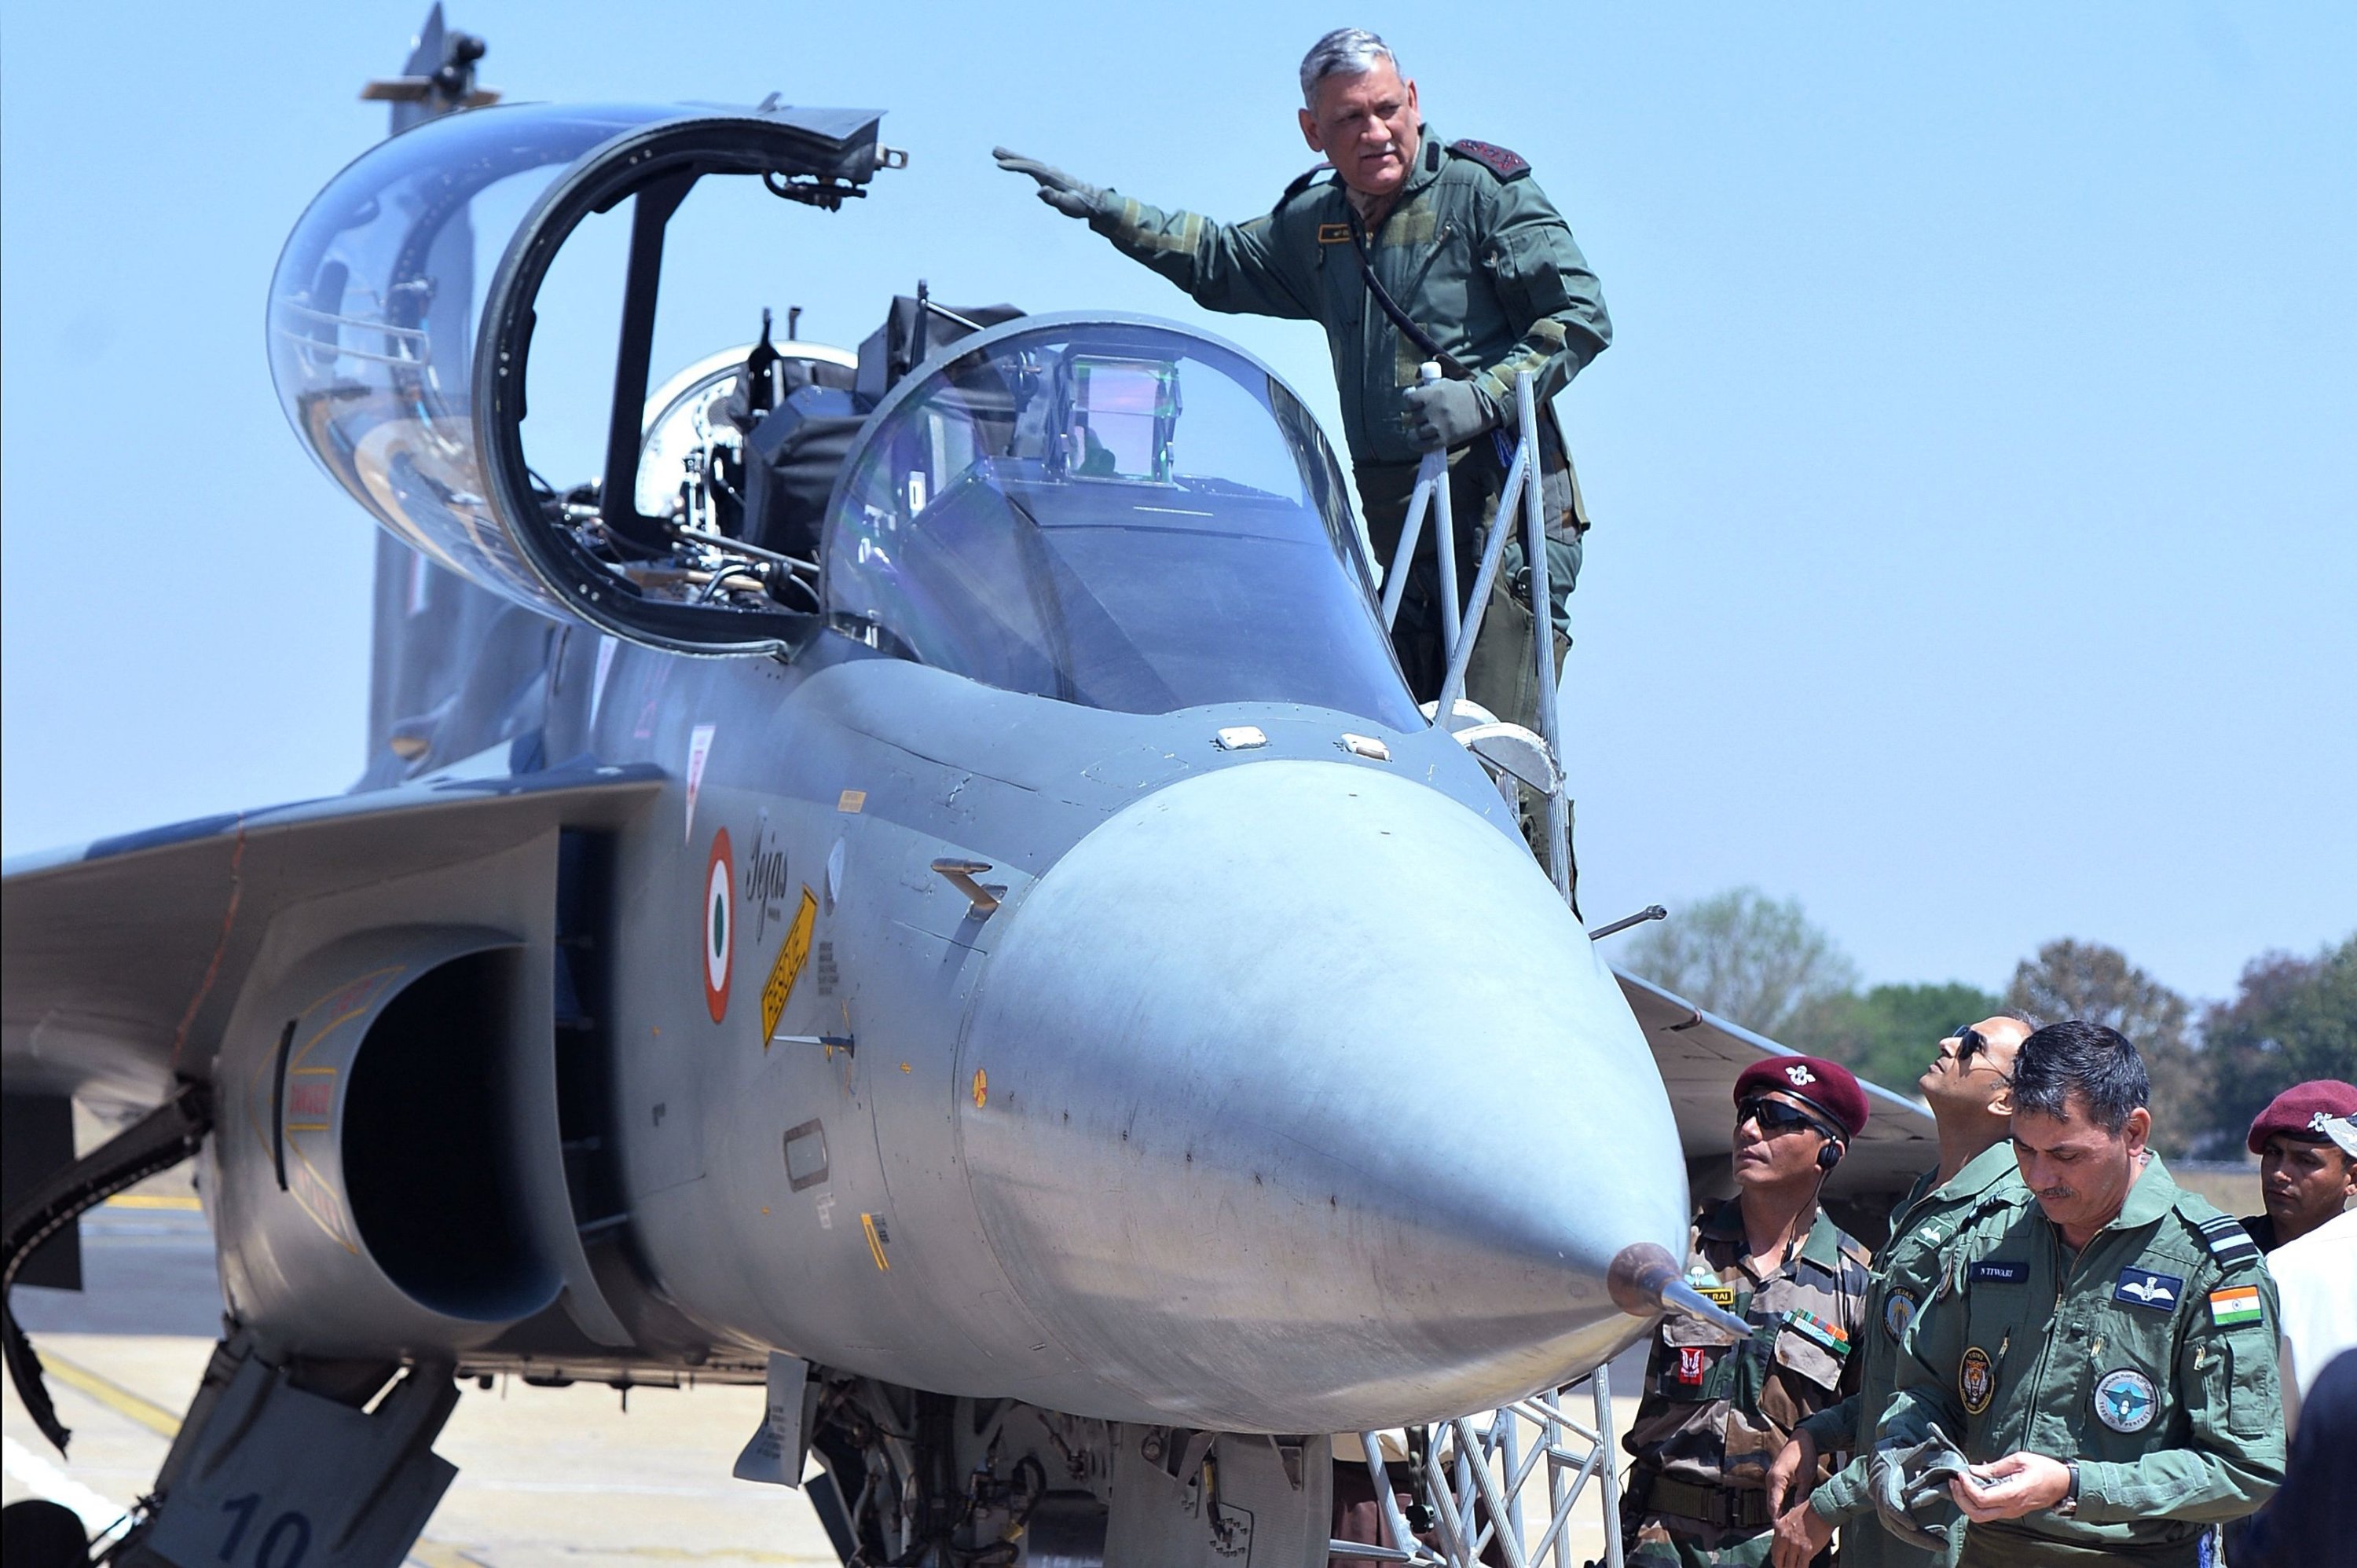 In this file photo, the then-27th chief of army staff, Bipin Rawat, waves as he boards the co-pilot seat of a Light Combat Aircraft of the Indian Air Force during the Aero India airshow at the Yelahanka Air Force station in Bangalore, India, Feb. 21, 2019. (AFP Photo)